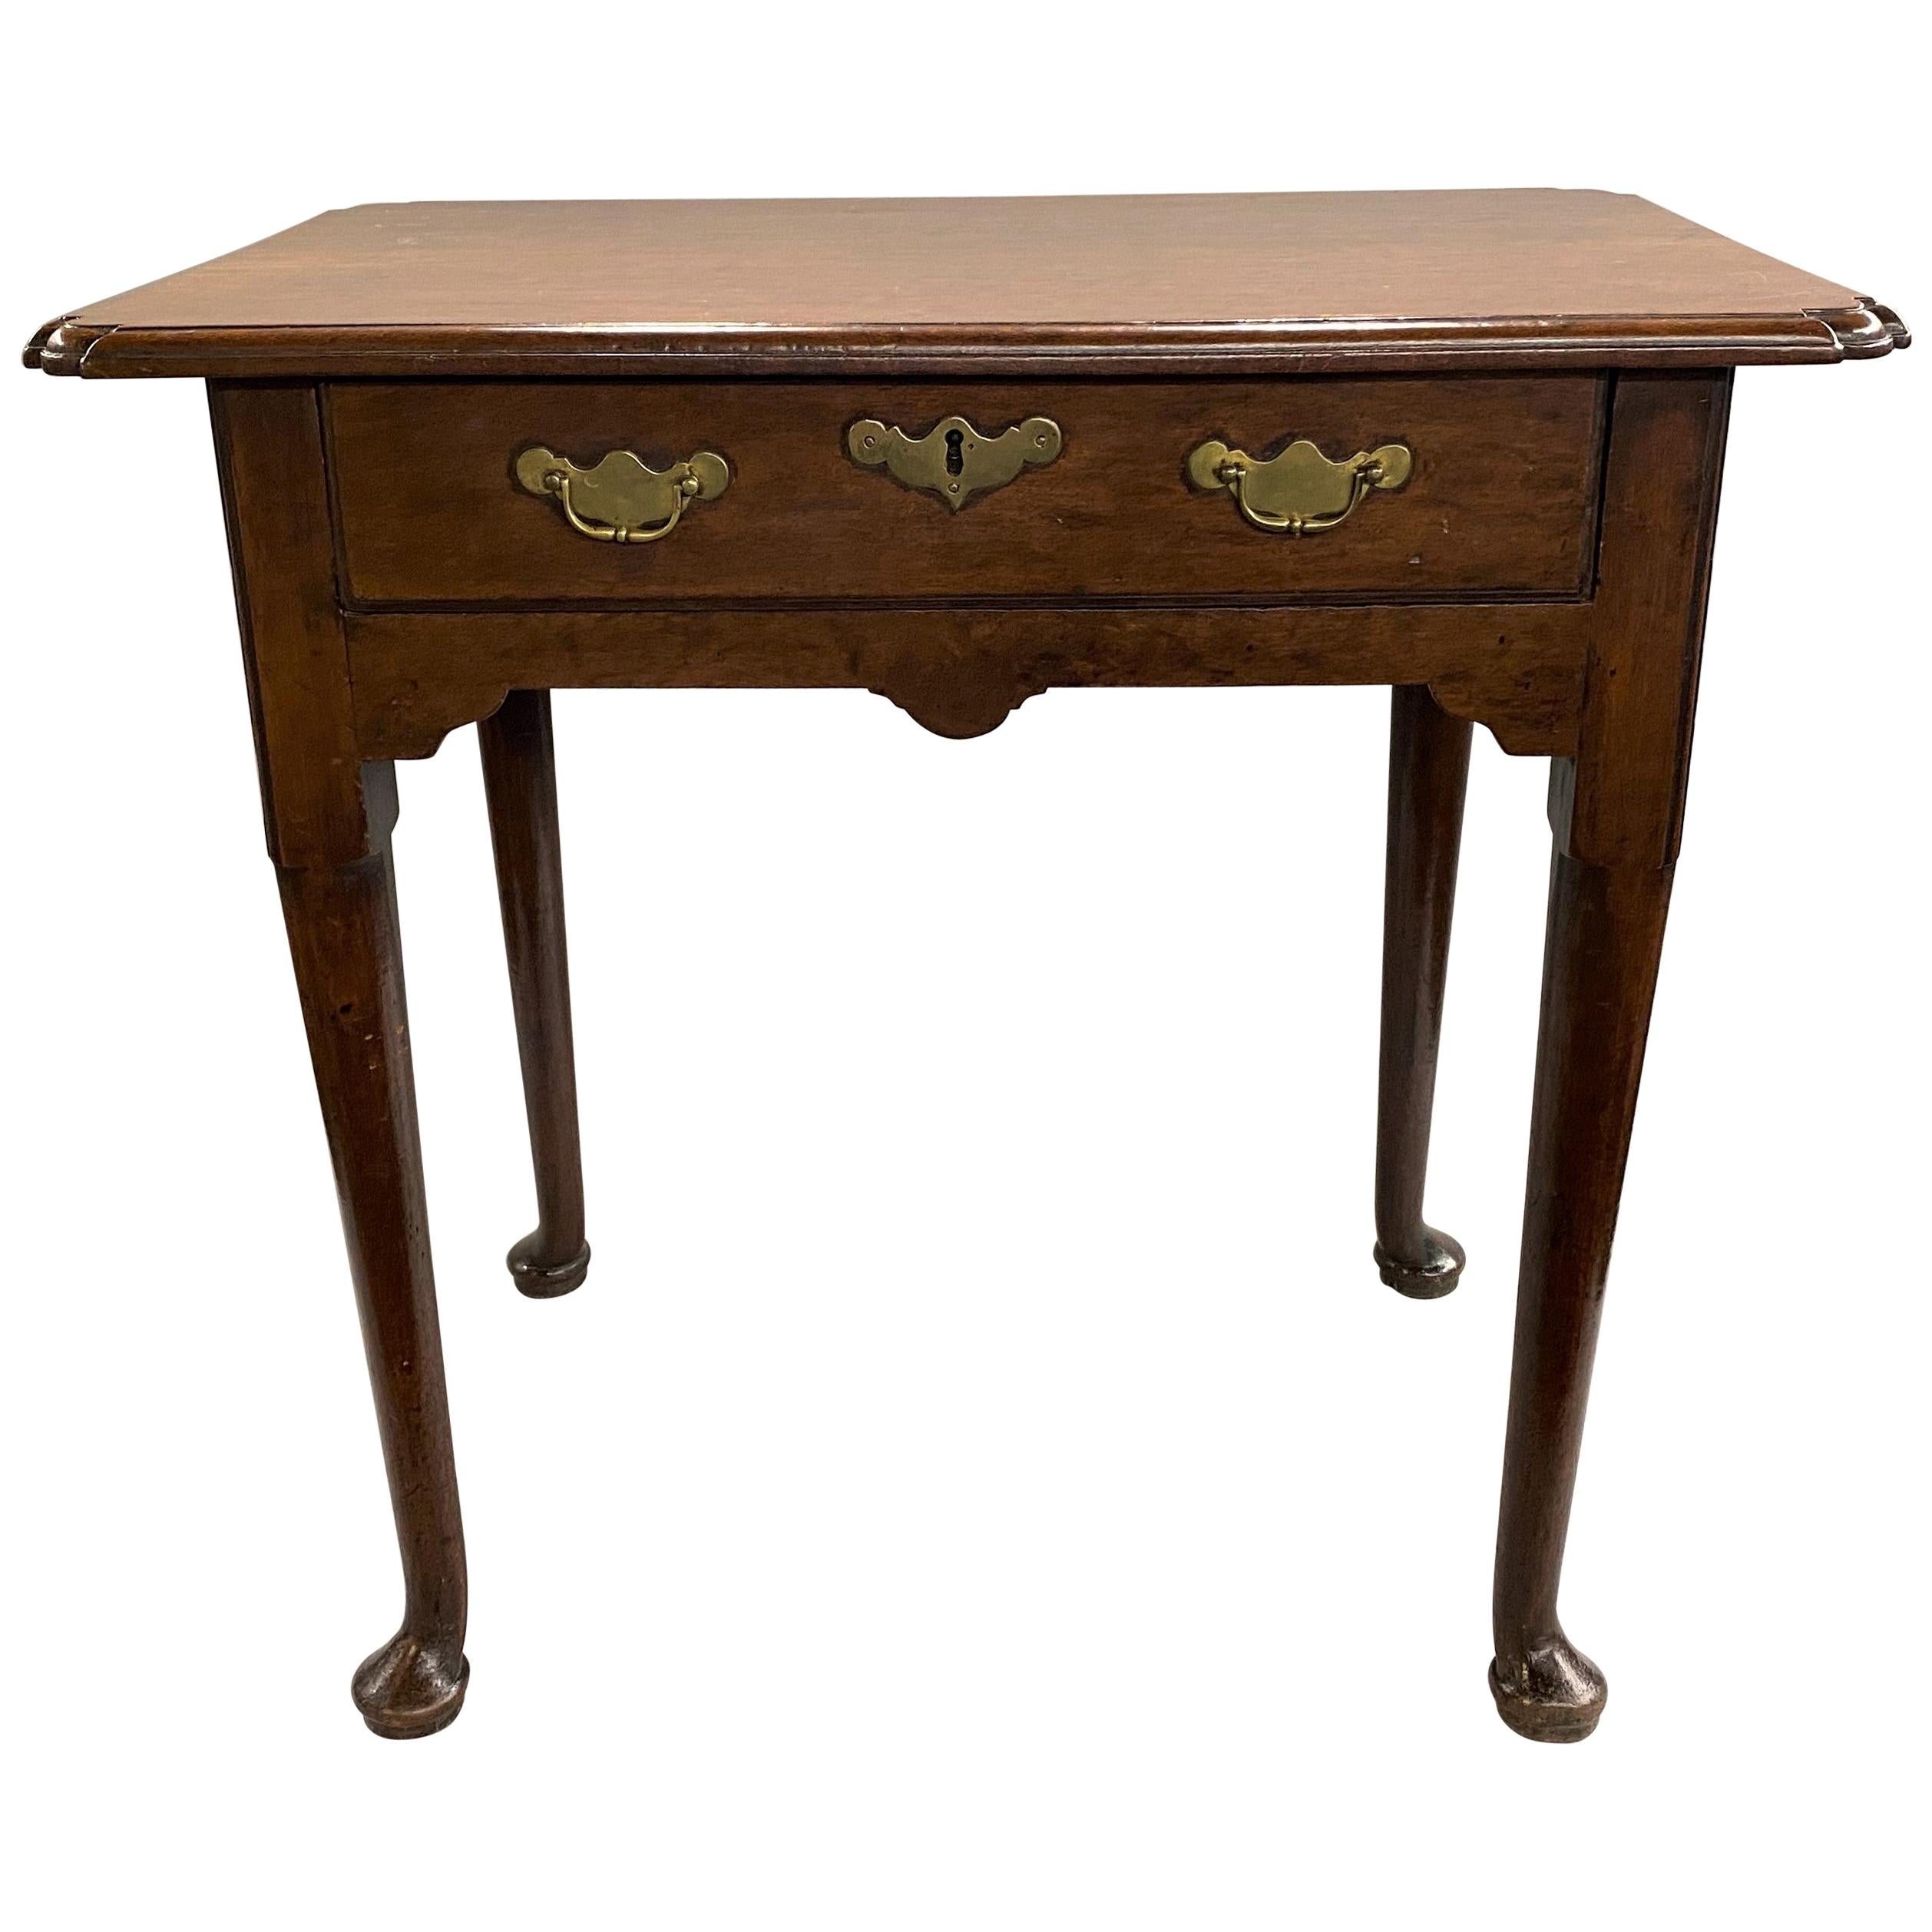 Rare 18th Century English Table in Walnut with Pinched Top Corners